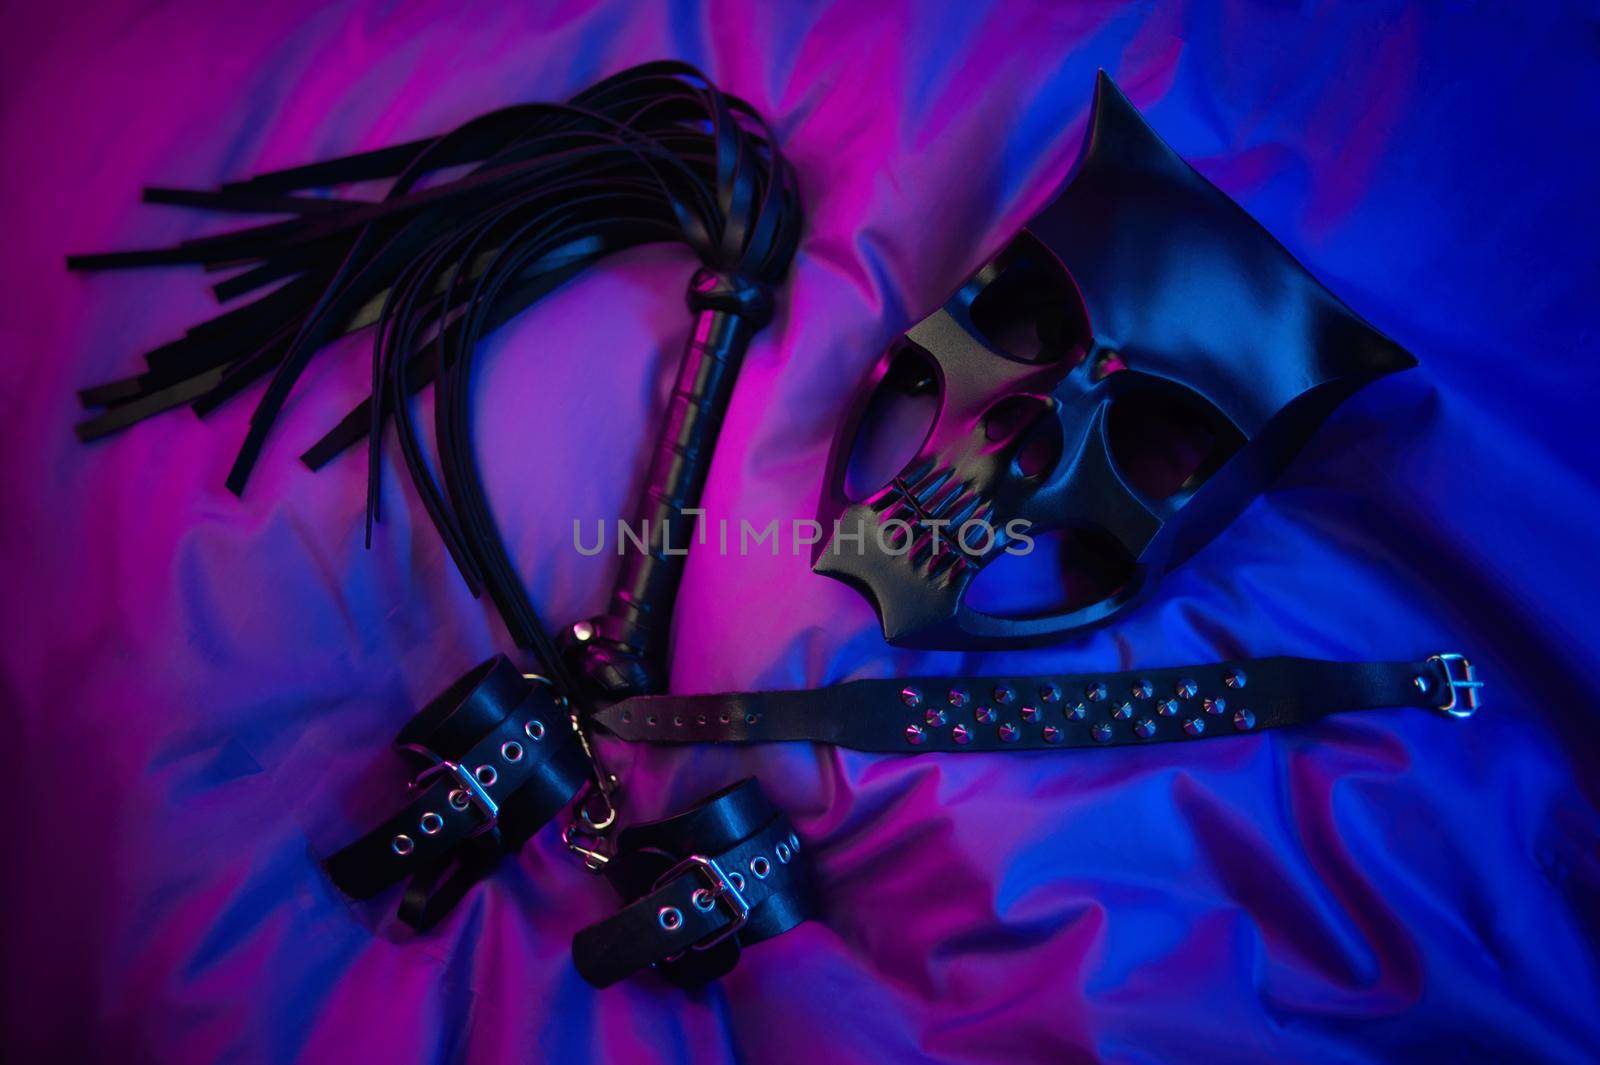 the bdsm mask and leather accessories for bdsm games in neon light